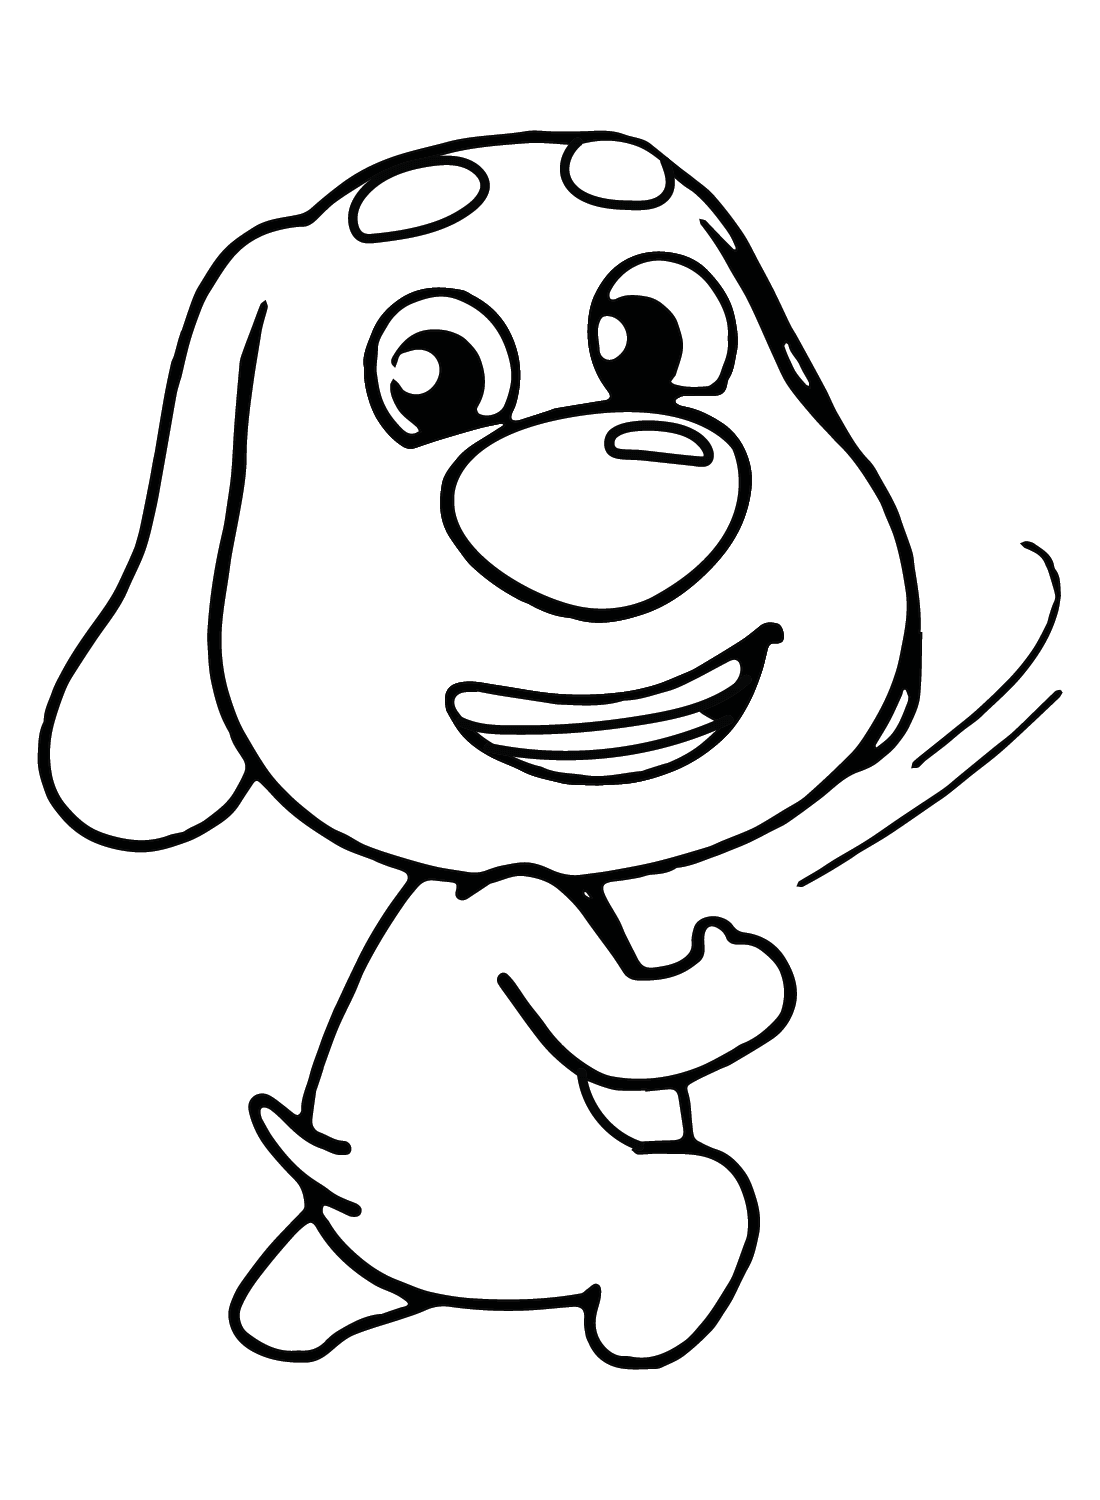 Talking Ben Images Coloring Page